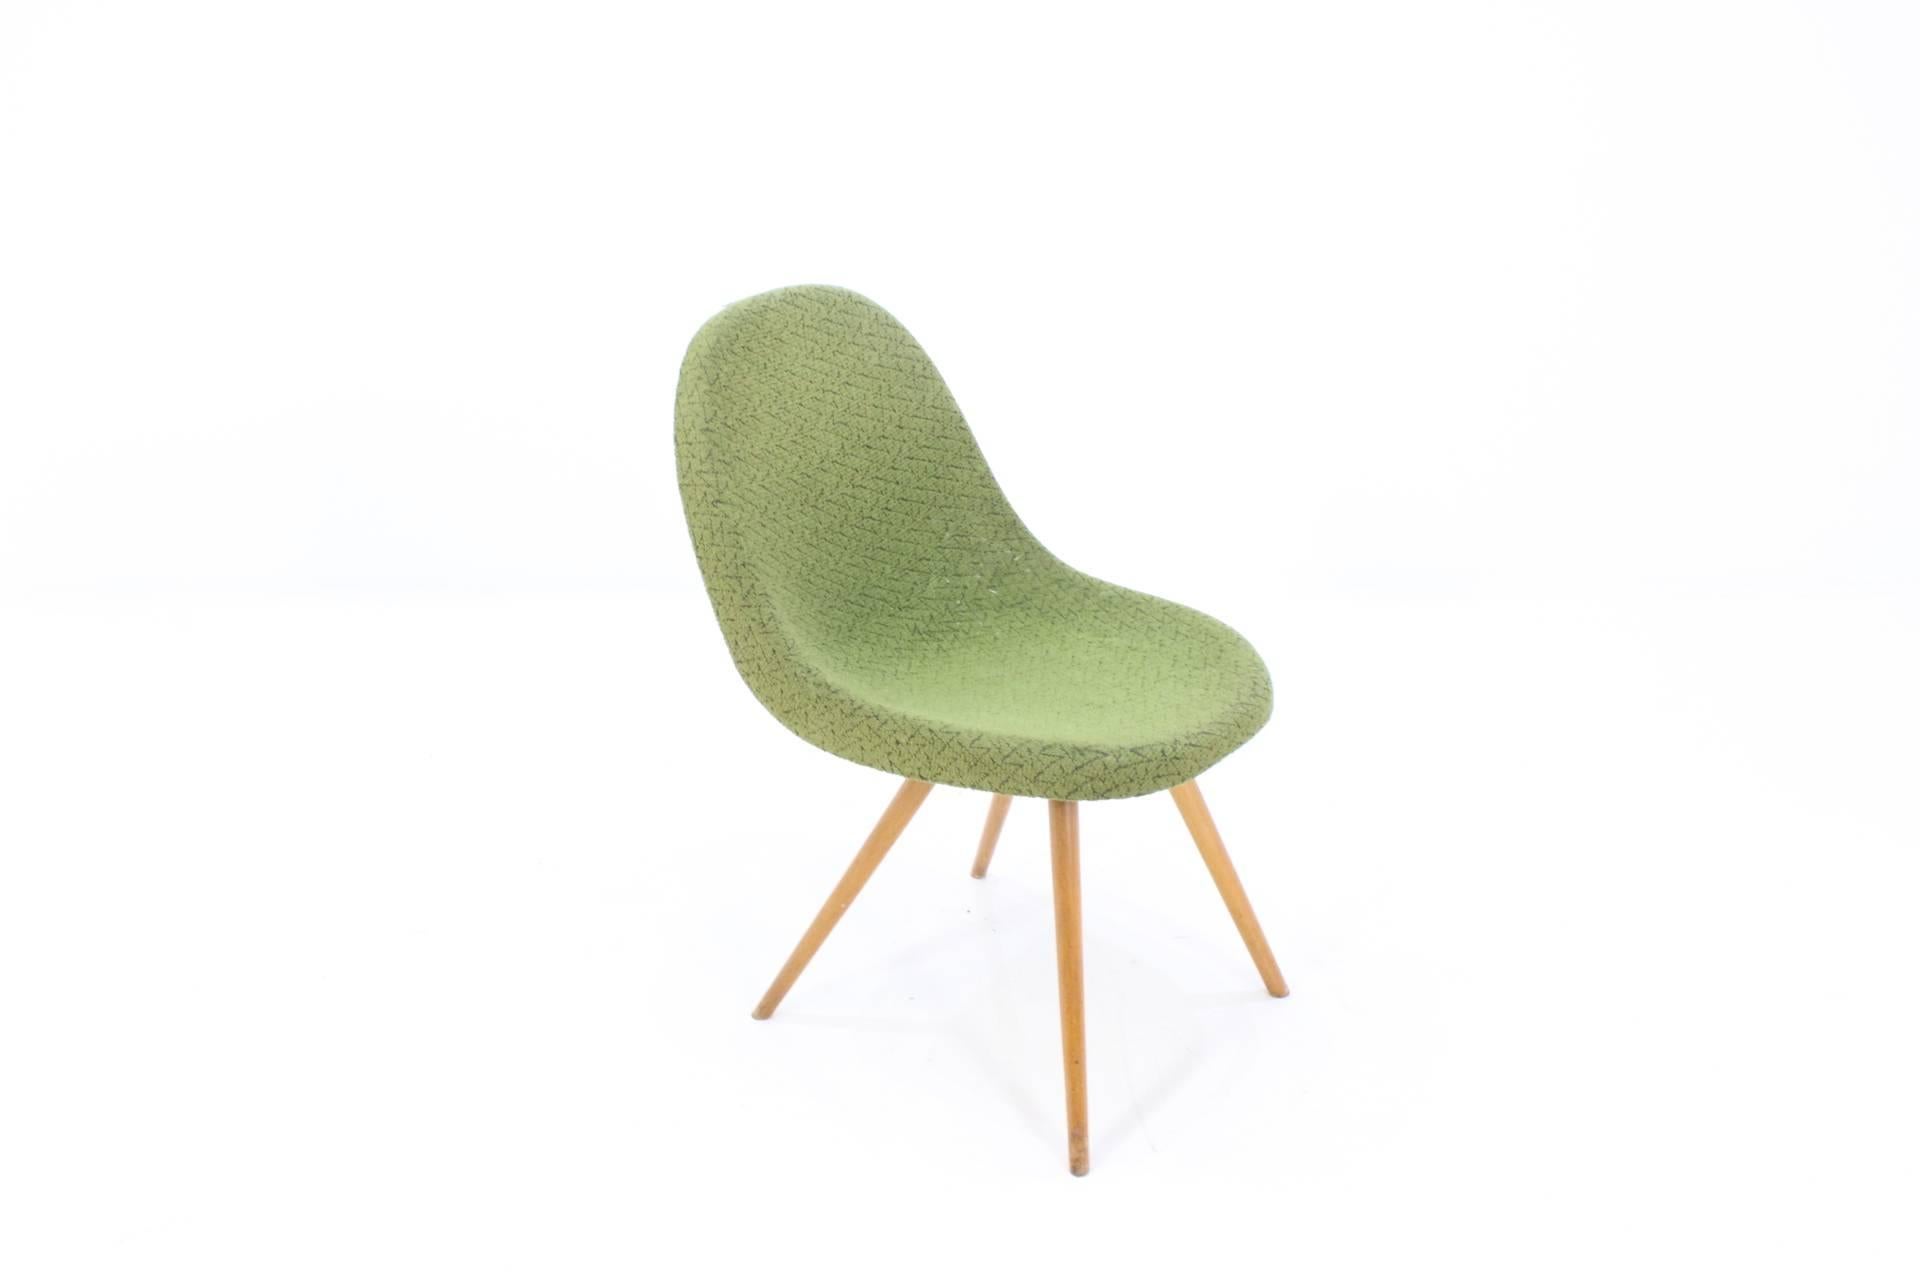 Very popular Czech design chair, 1950s. Designer Miroslav Navratil. Original condition. One place on the back of a slightly torn upholstery. Chair is solid and very comfortable.